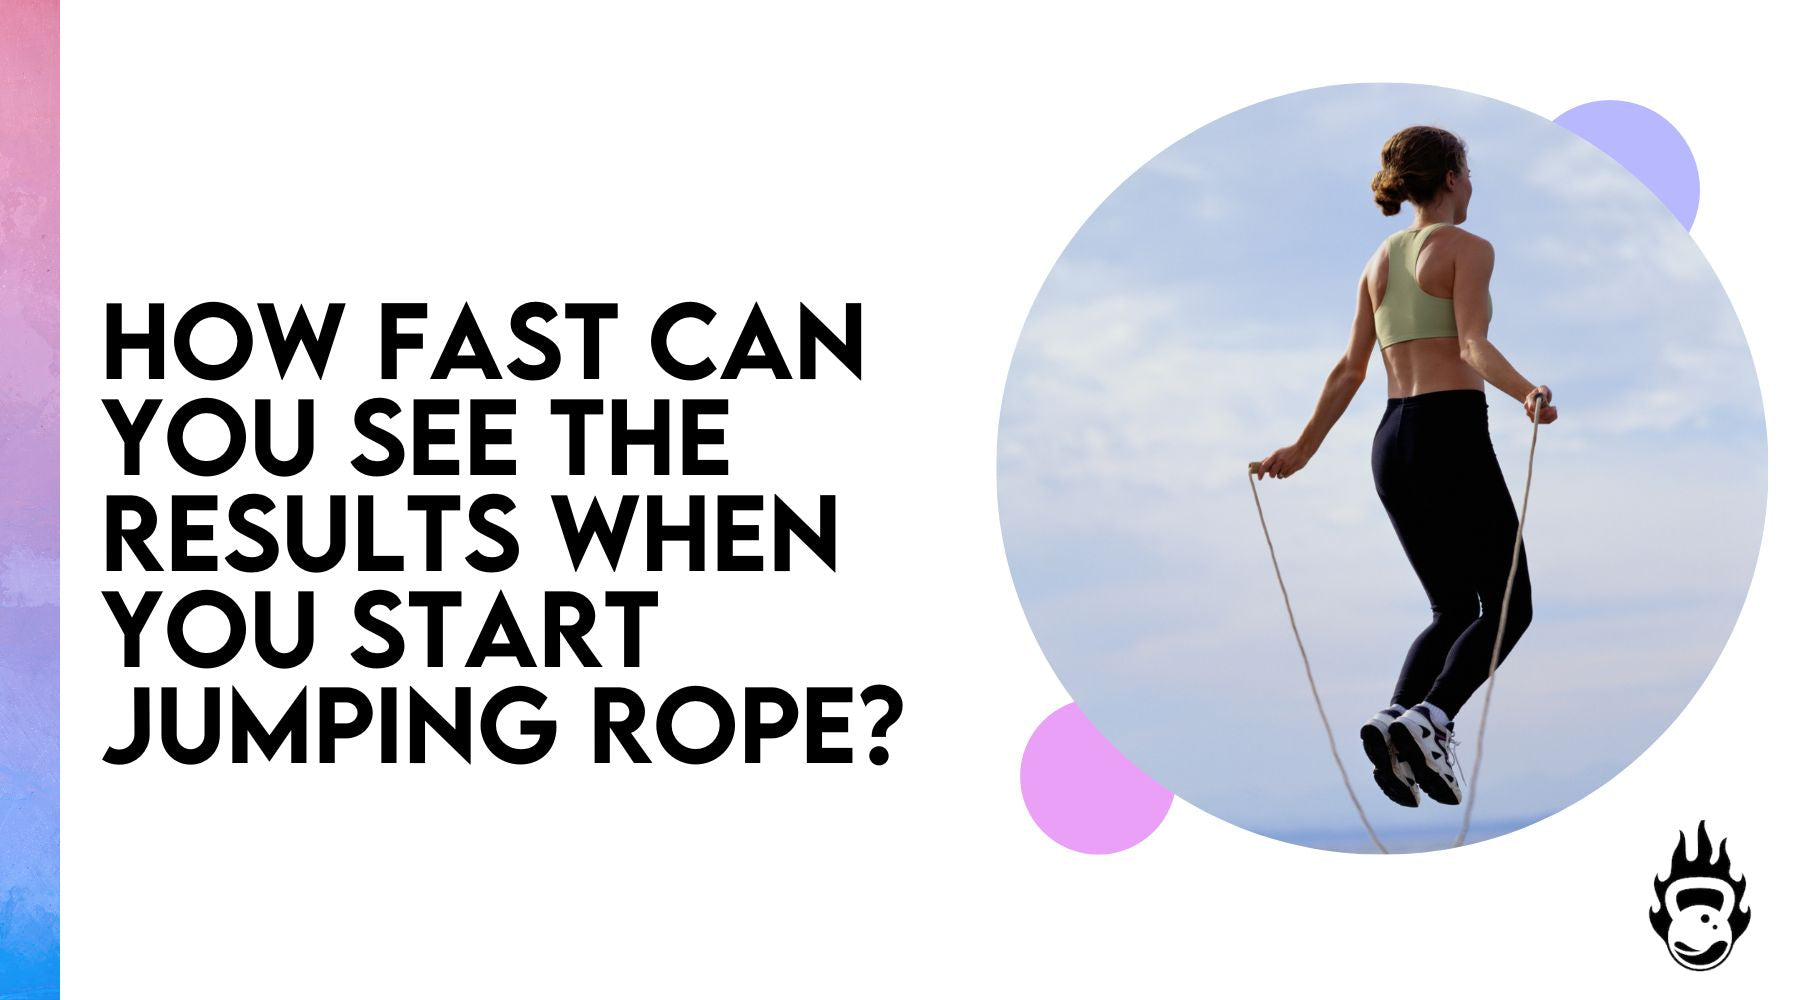 4 Reasons You Should Jump Rope For Exercise